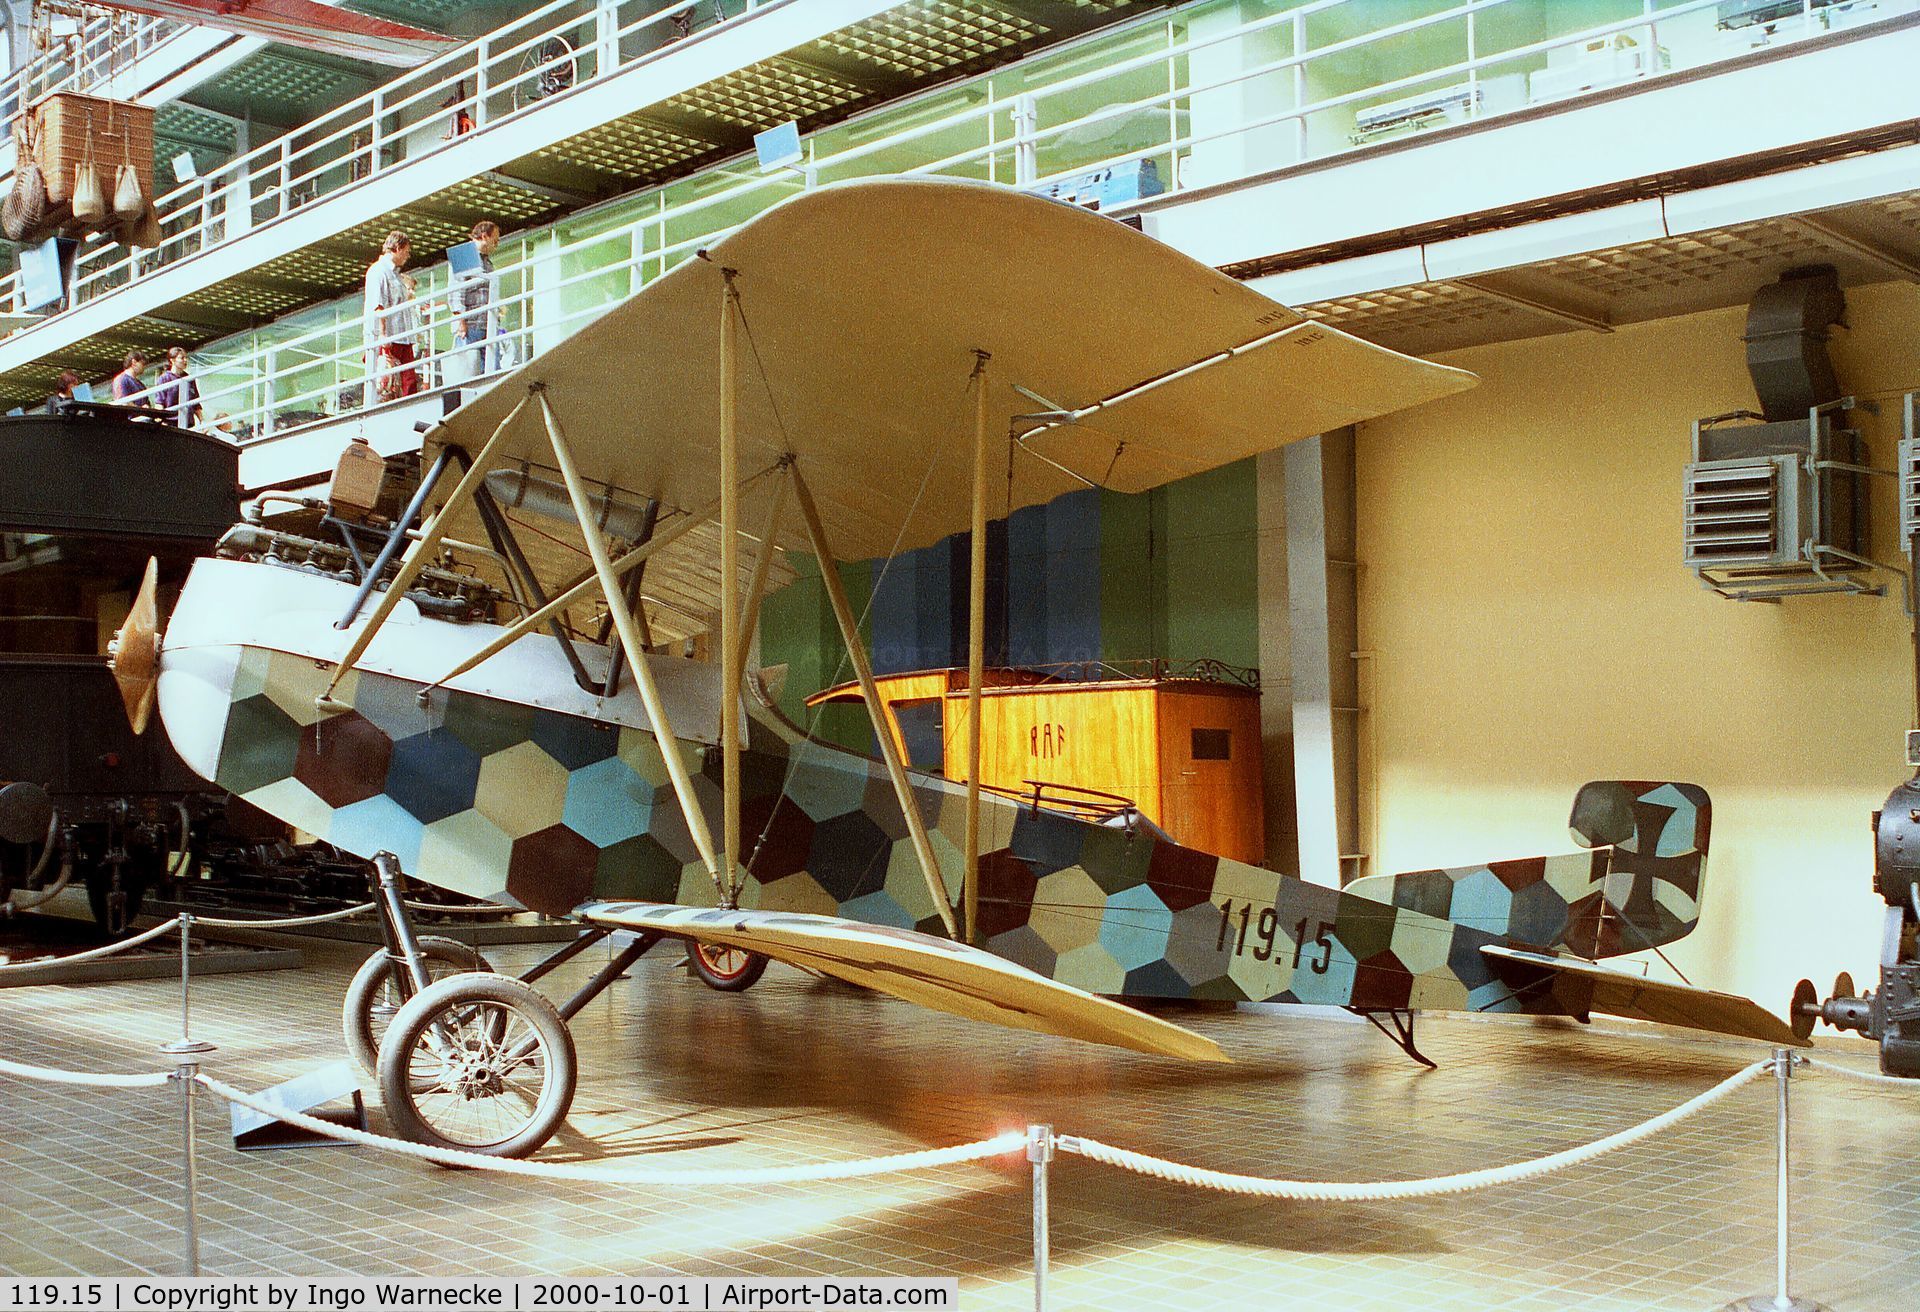 119.15, Knoller C II C/N 15, Knoller C II of the austro-hungarian army aviation at the Narodni Technicke Muzeum, Prague